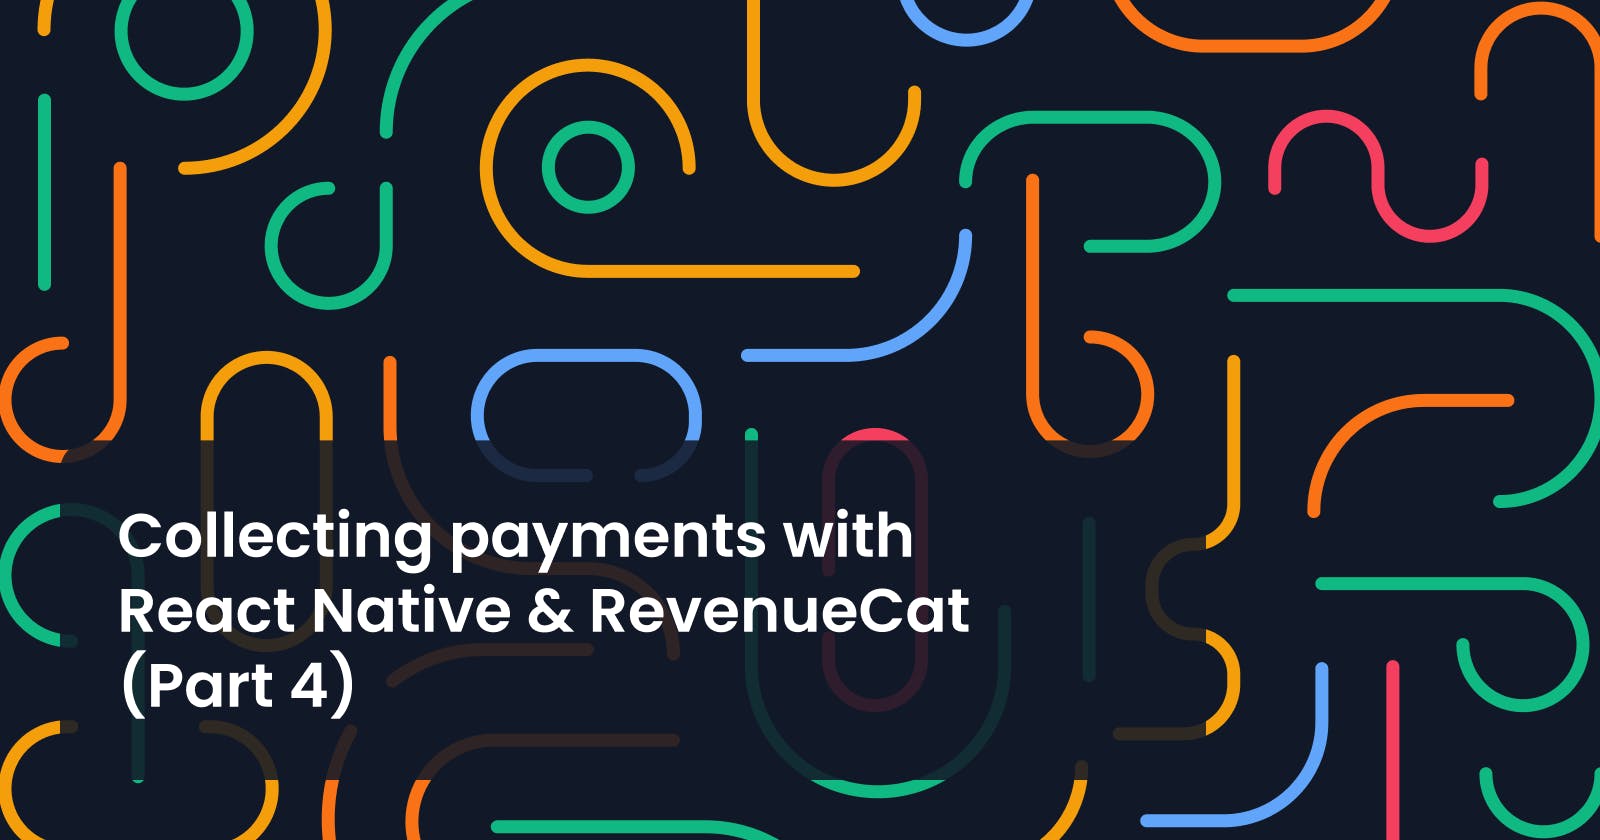 Collecting payments with React Native & RevenueCat (Part 4): Building a Paywall screen